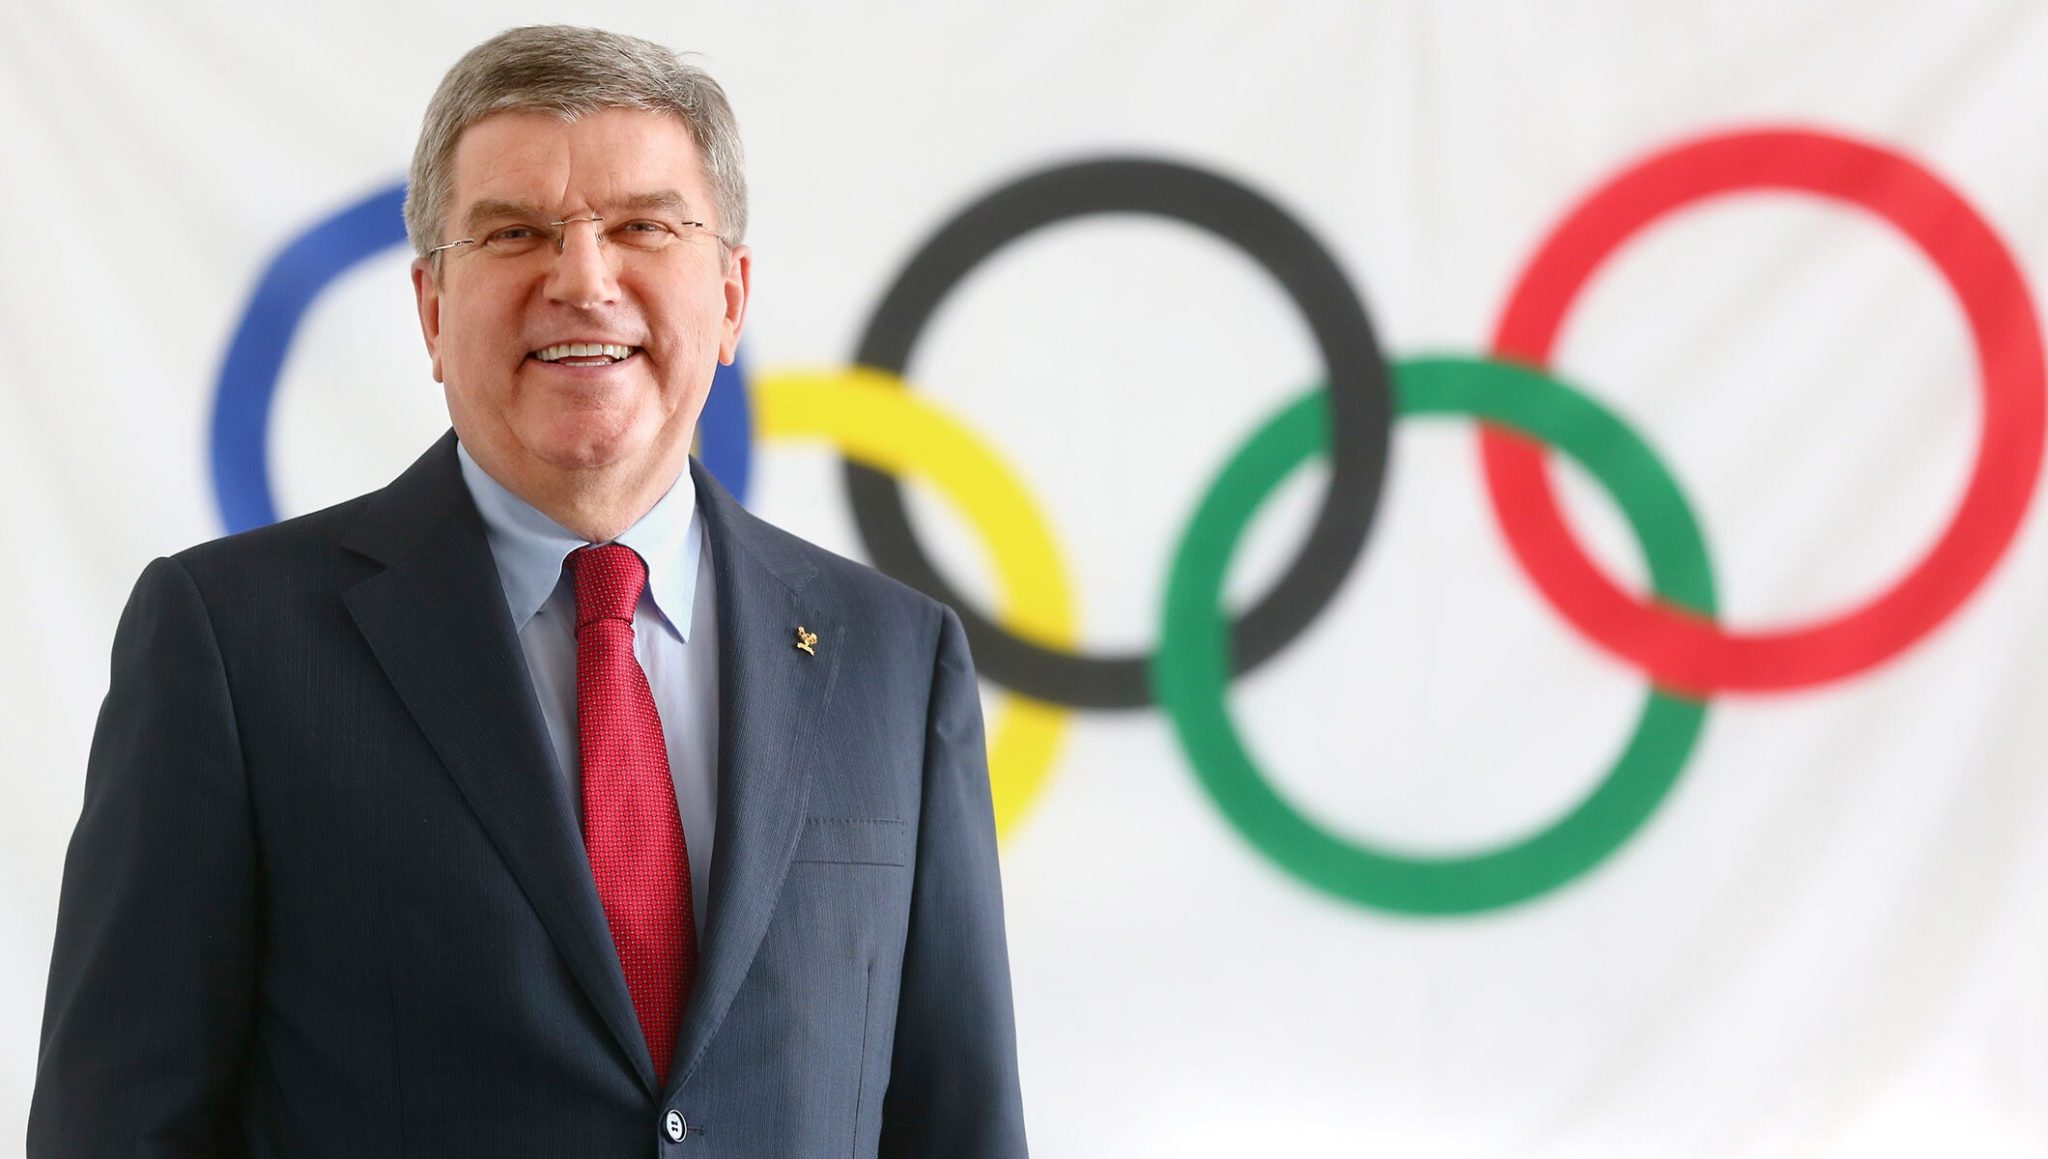 Thomas Bach Will Give A Powerful Message Of Peace In Tokyo Olympics